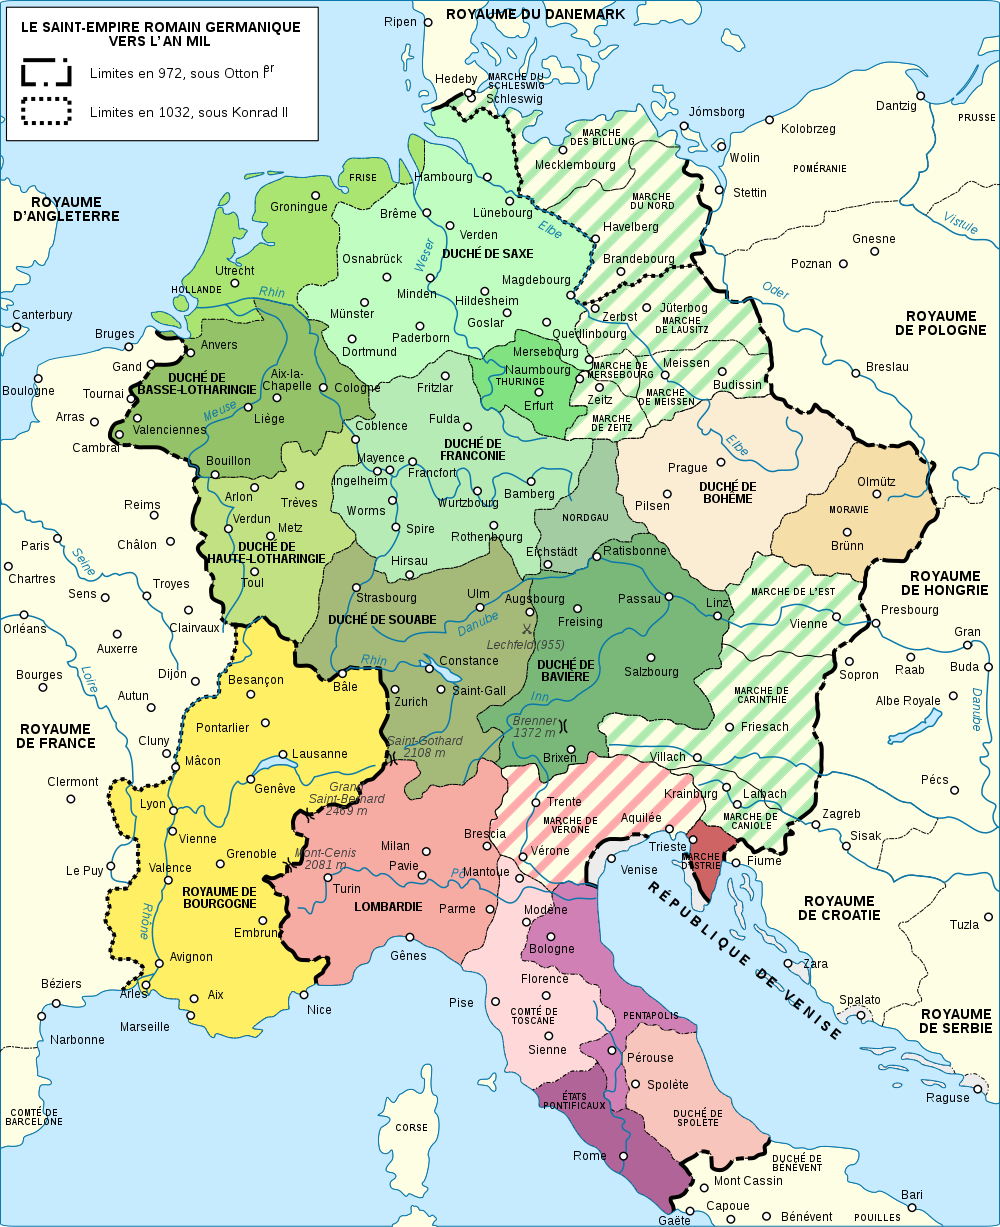 1000px-Holy_Roman_Empire_1000_map-fr.svg.png